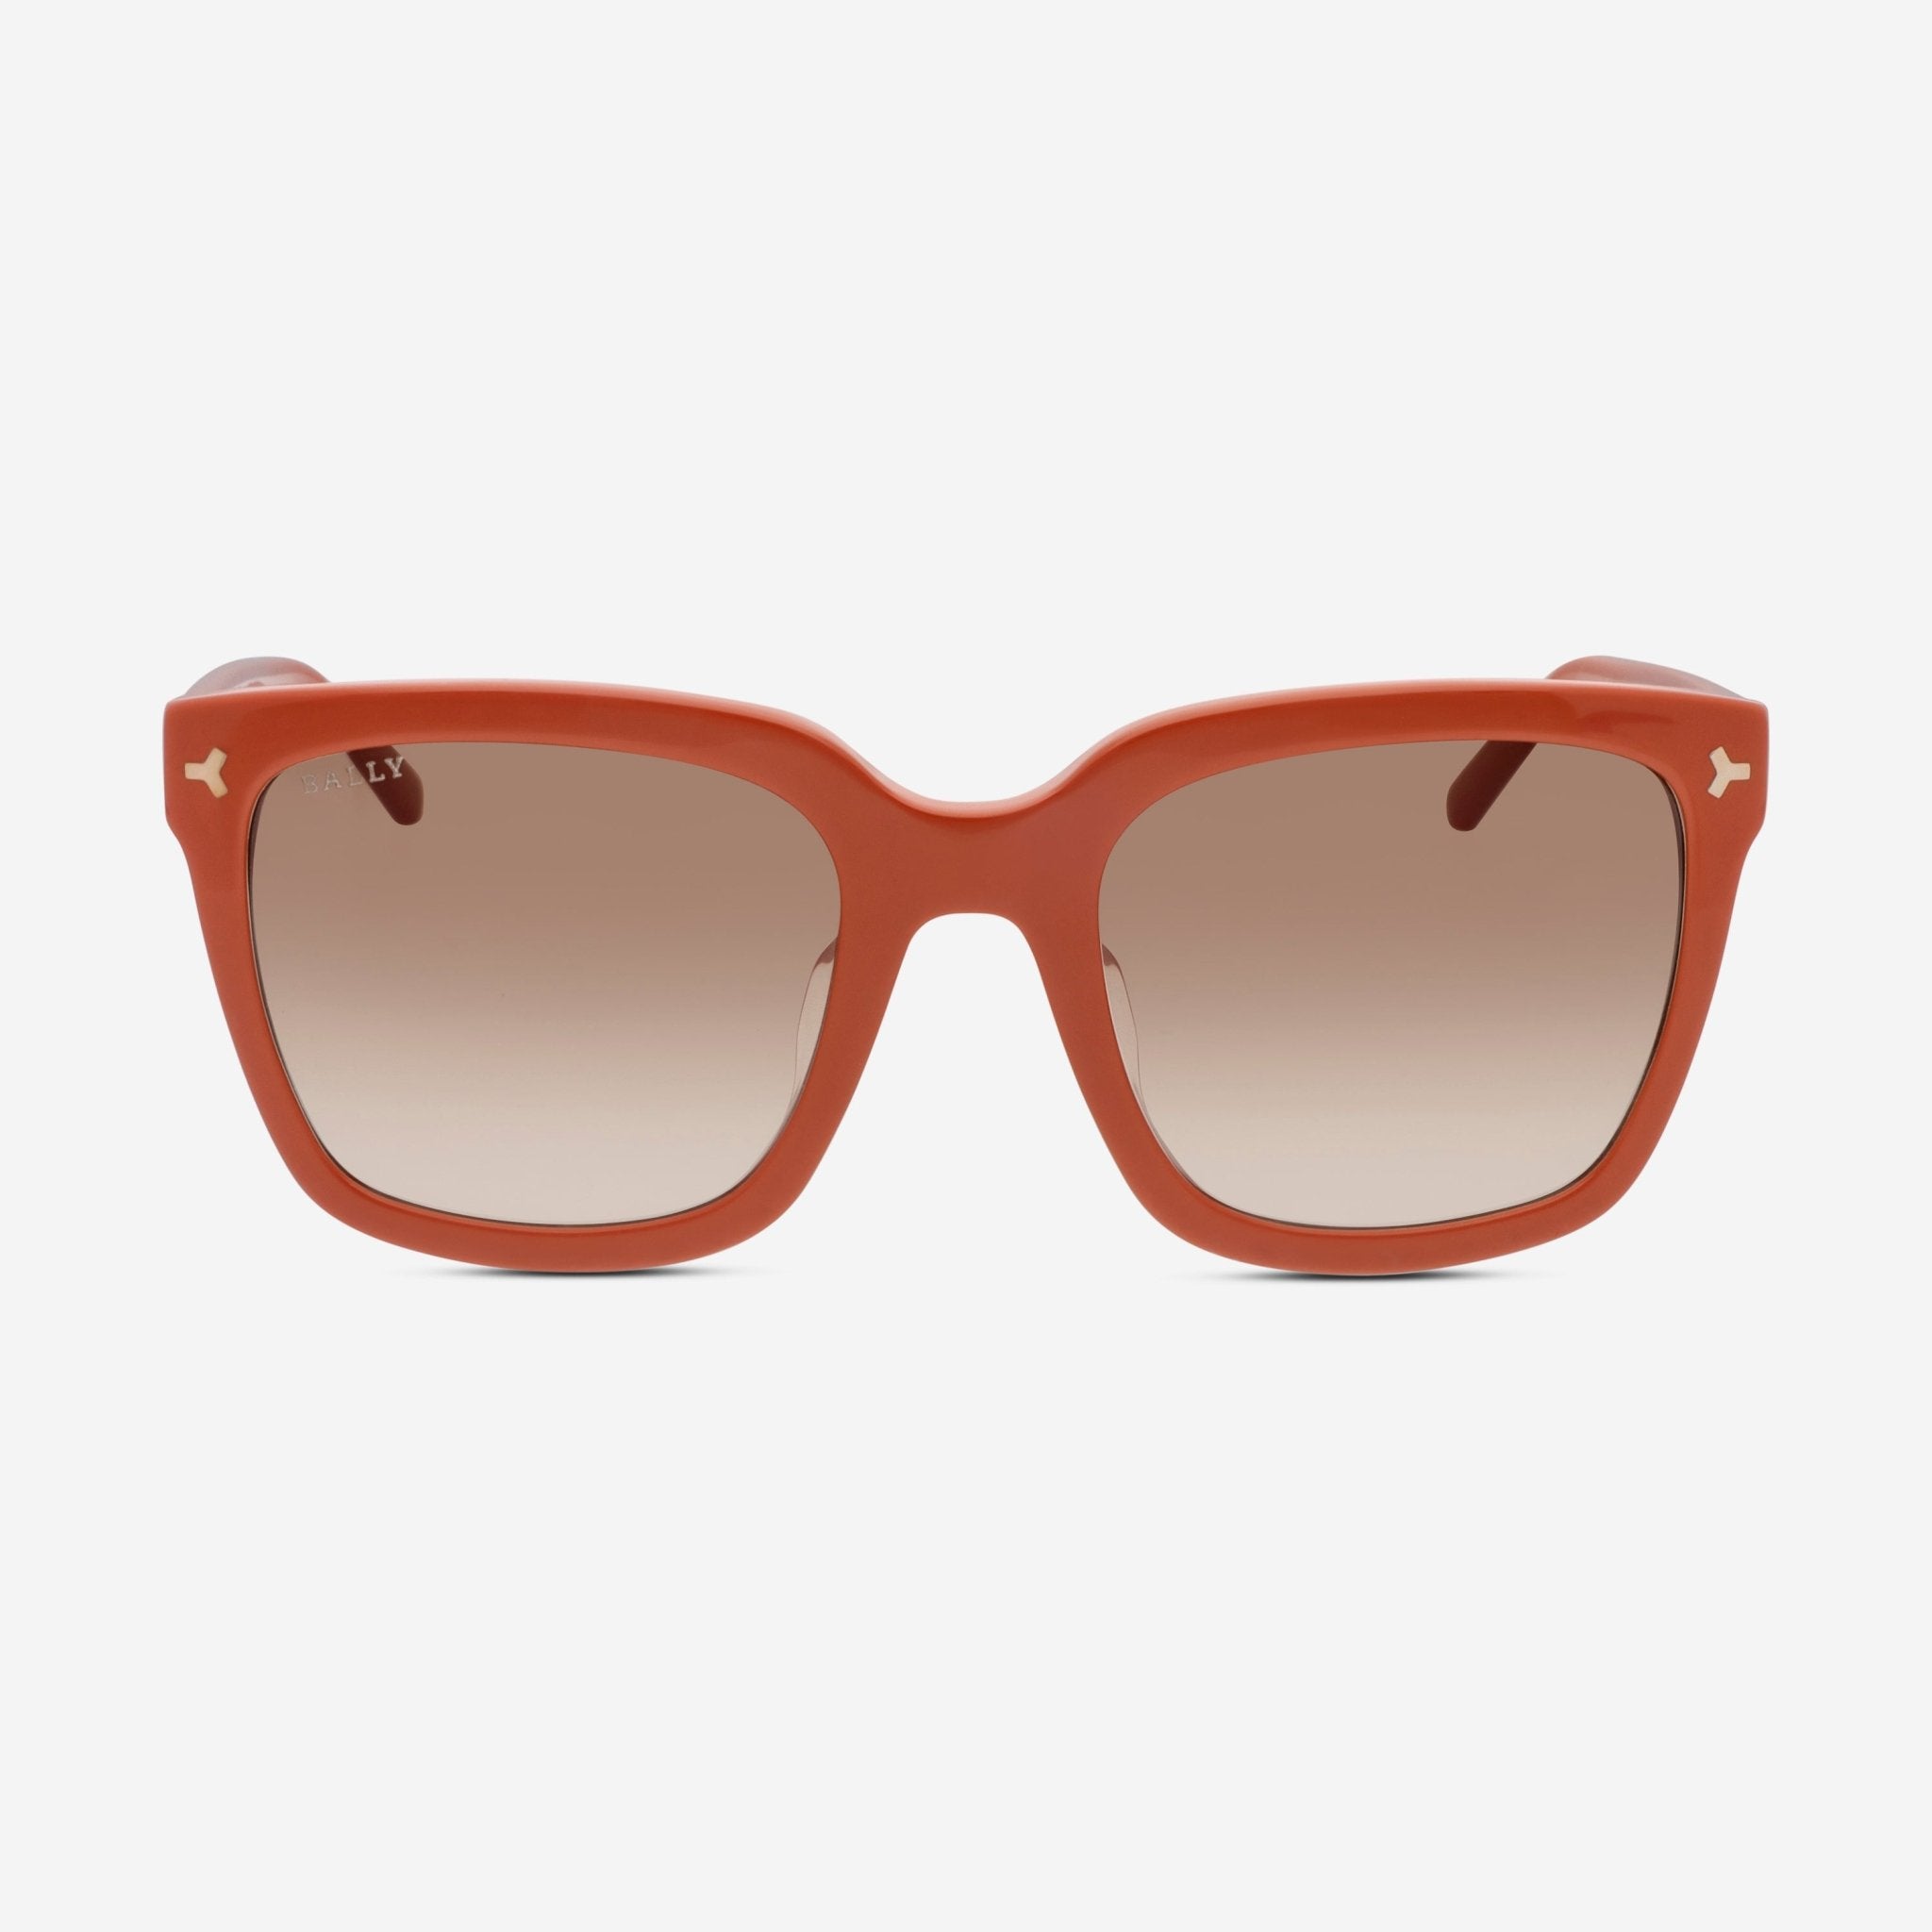 Bally Women's Shiny Orange & Gradient Brown Oversized Sunglasses BY0034 - H - THE SOLIST - Bally